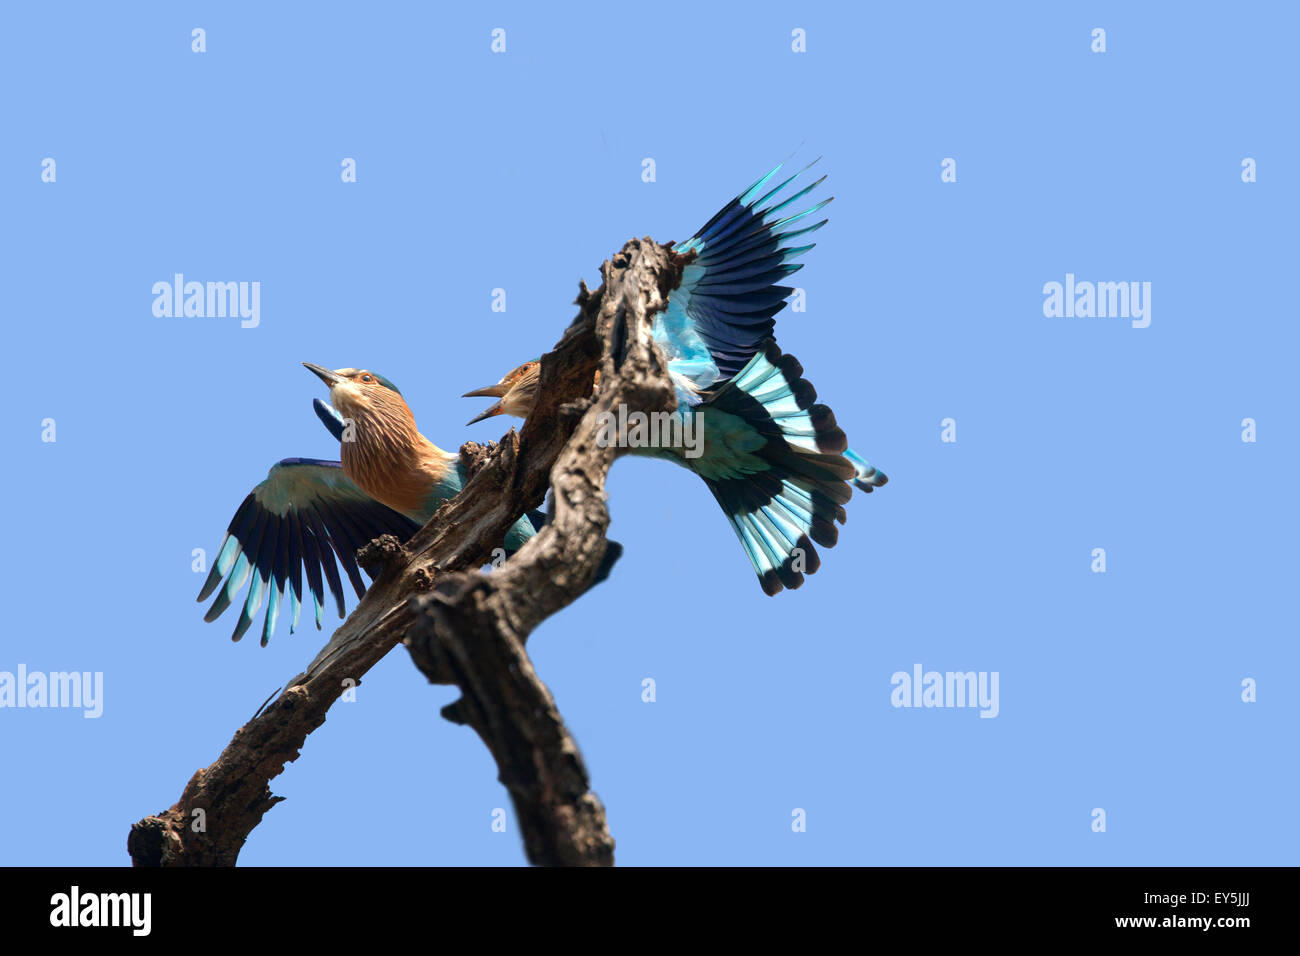 Indian Rollers fighting a on branch - Bandhavgarh India Stock Photo